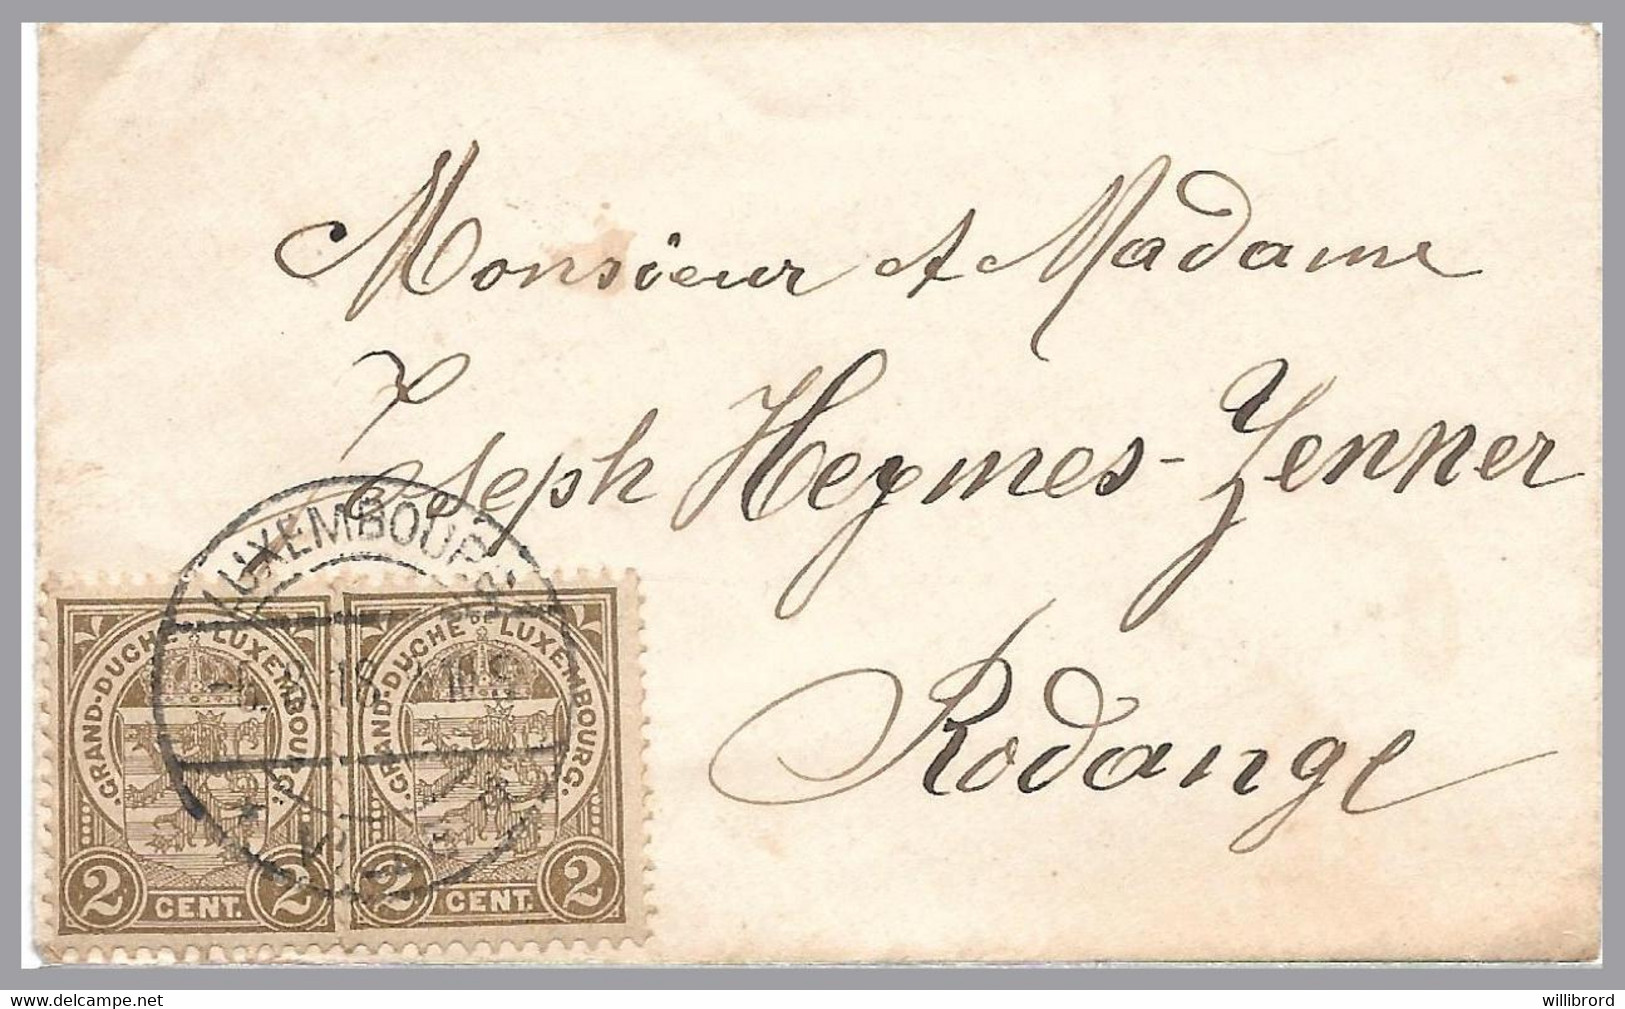 LUXEMBOURG - 1918 Visiting Card Cover - 2c Arms Pair - Luxembourg To Rodange - Joseph Heymes-Zenner Family - 1907-24 Scudetto